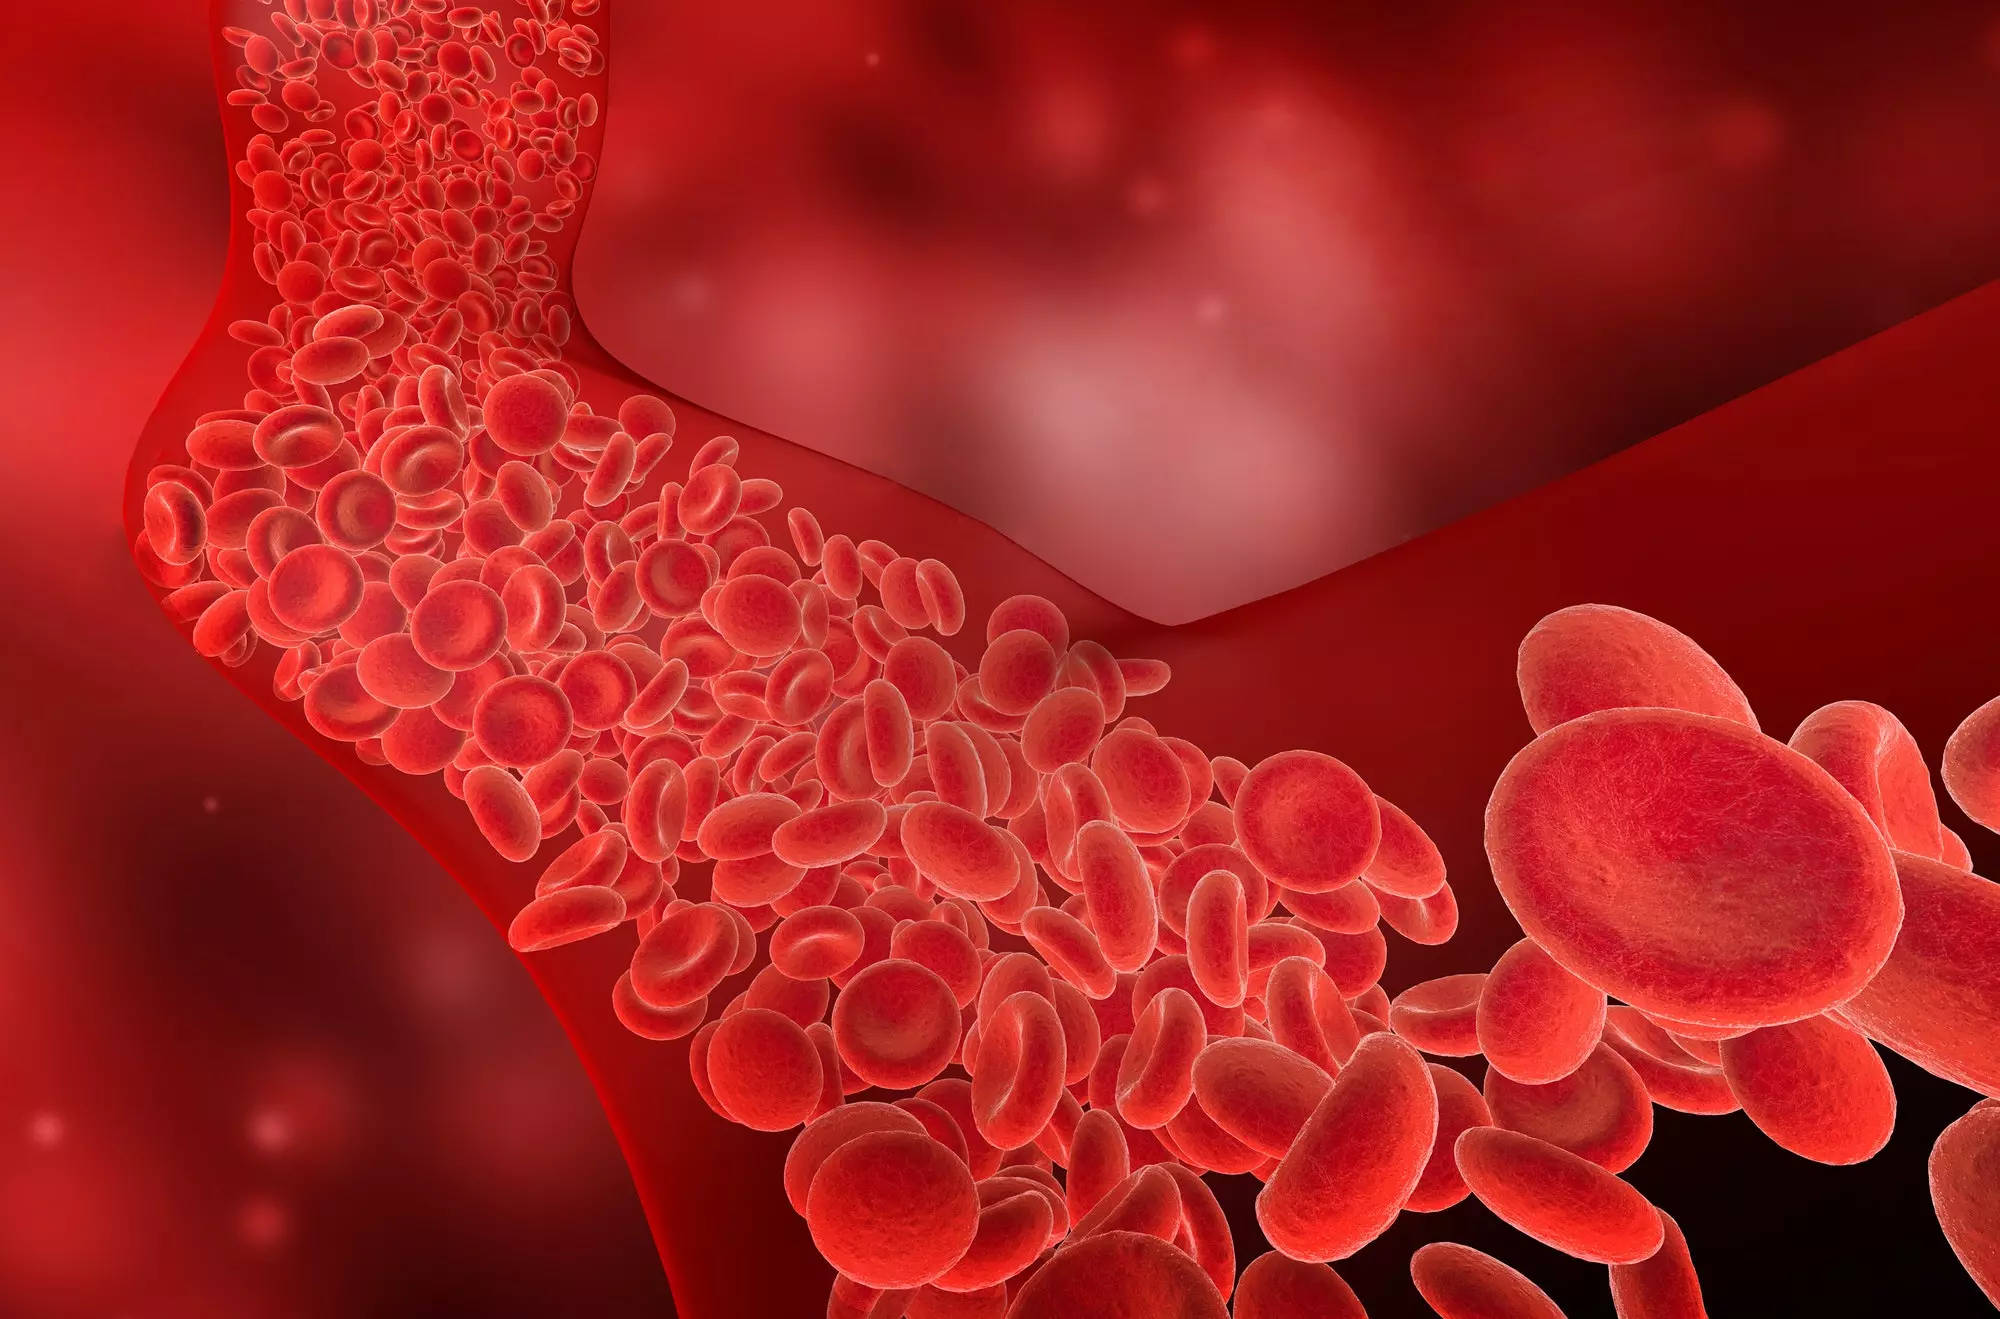 Flow of Red Blood Cells Into the Blood Vessel